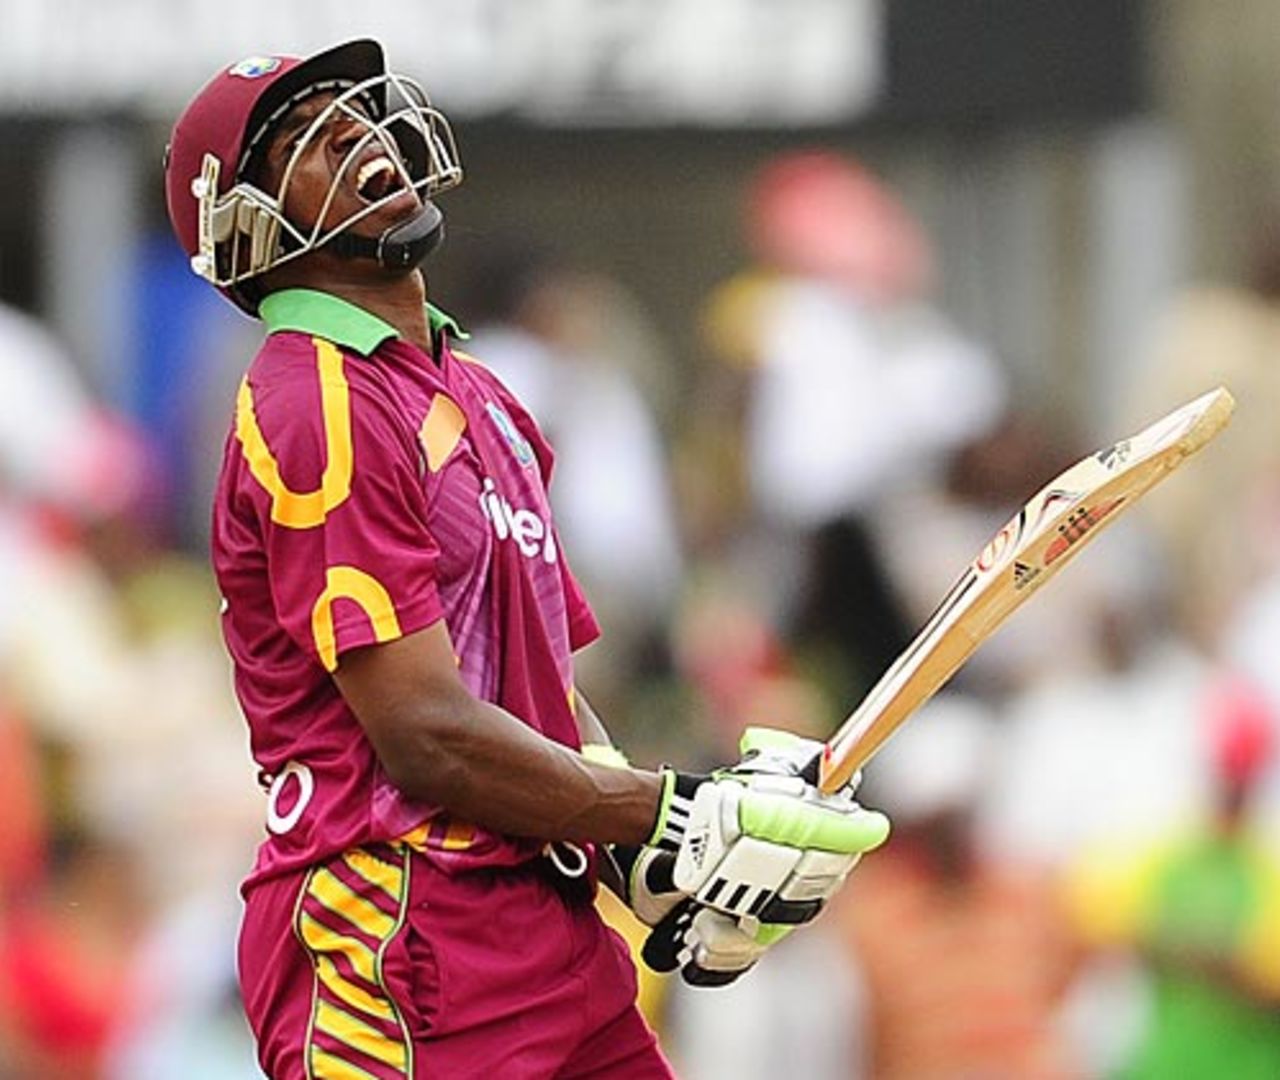 Dwayne Bravo is disappointed after his dismissal, West Indies v South Africa, 3rd ODI, Dominica, May 28, 2010